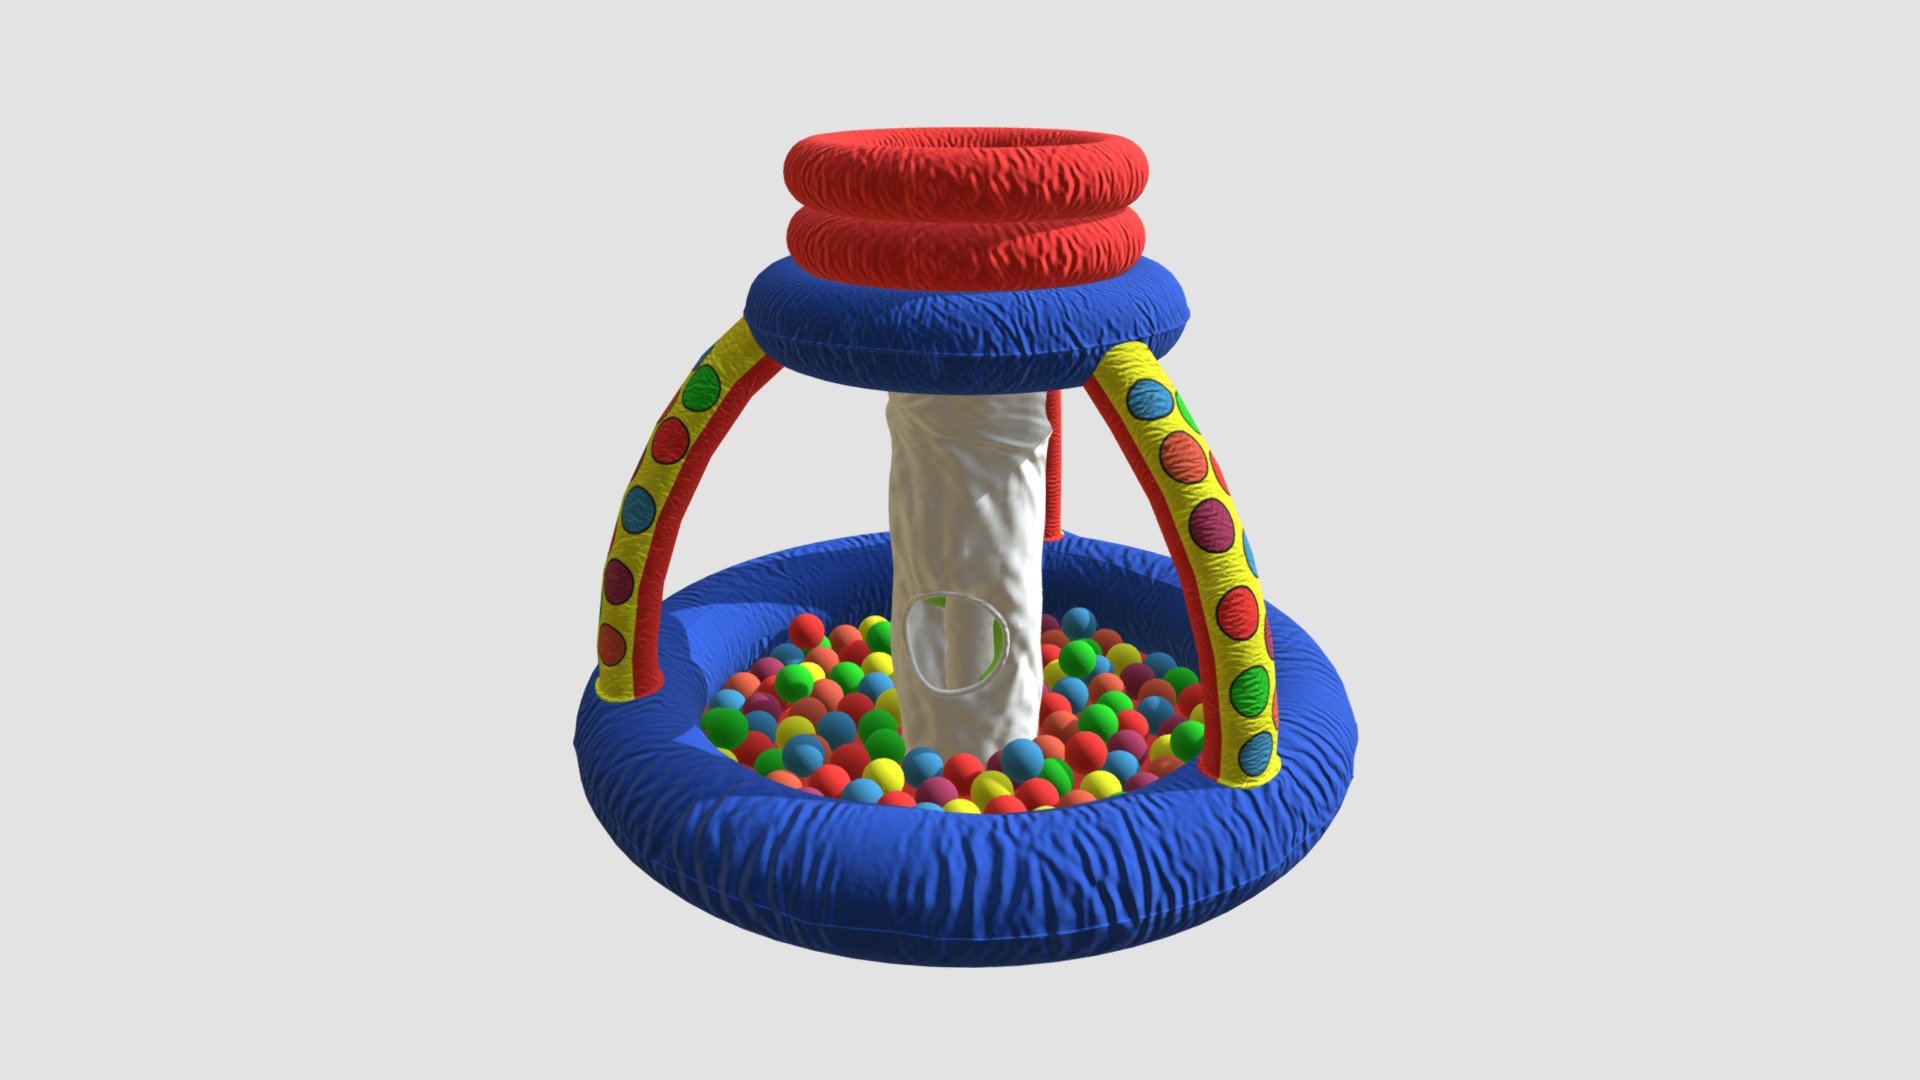 Highly detailed 3d model of inflatable ball pit with all textures, shaders and materials. It is ready to use, just put it into your scene 3d model